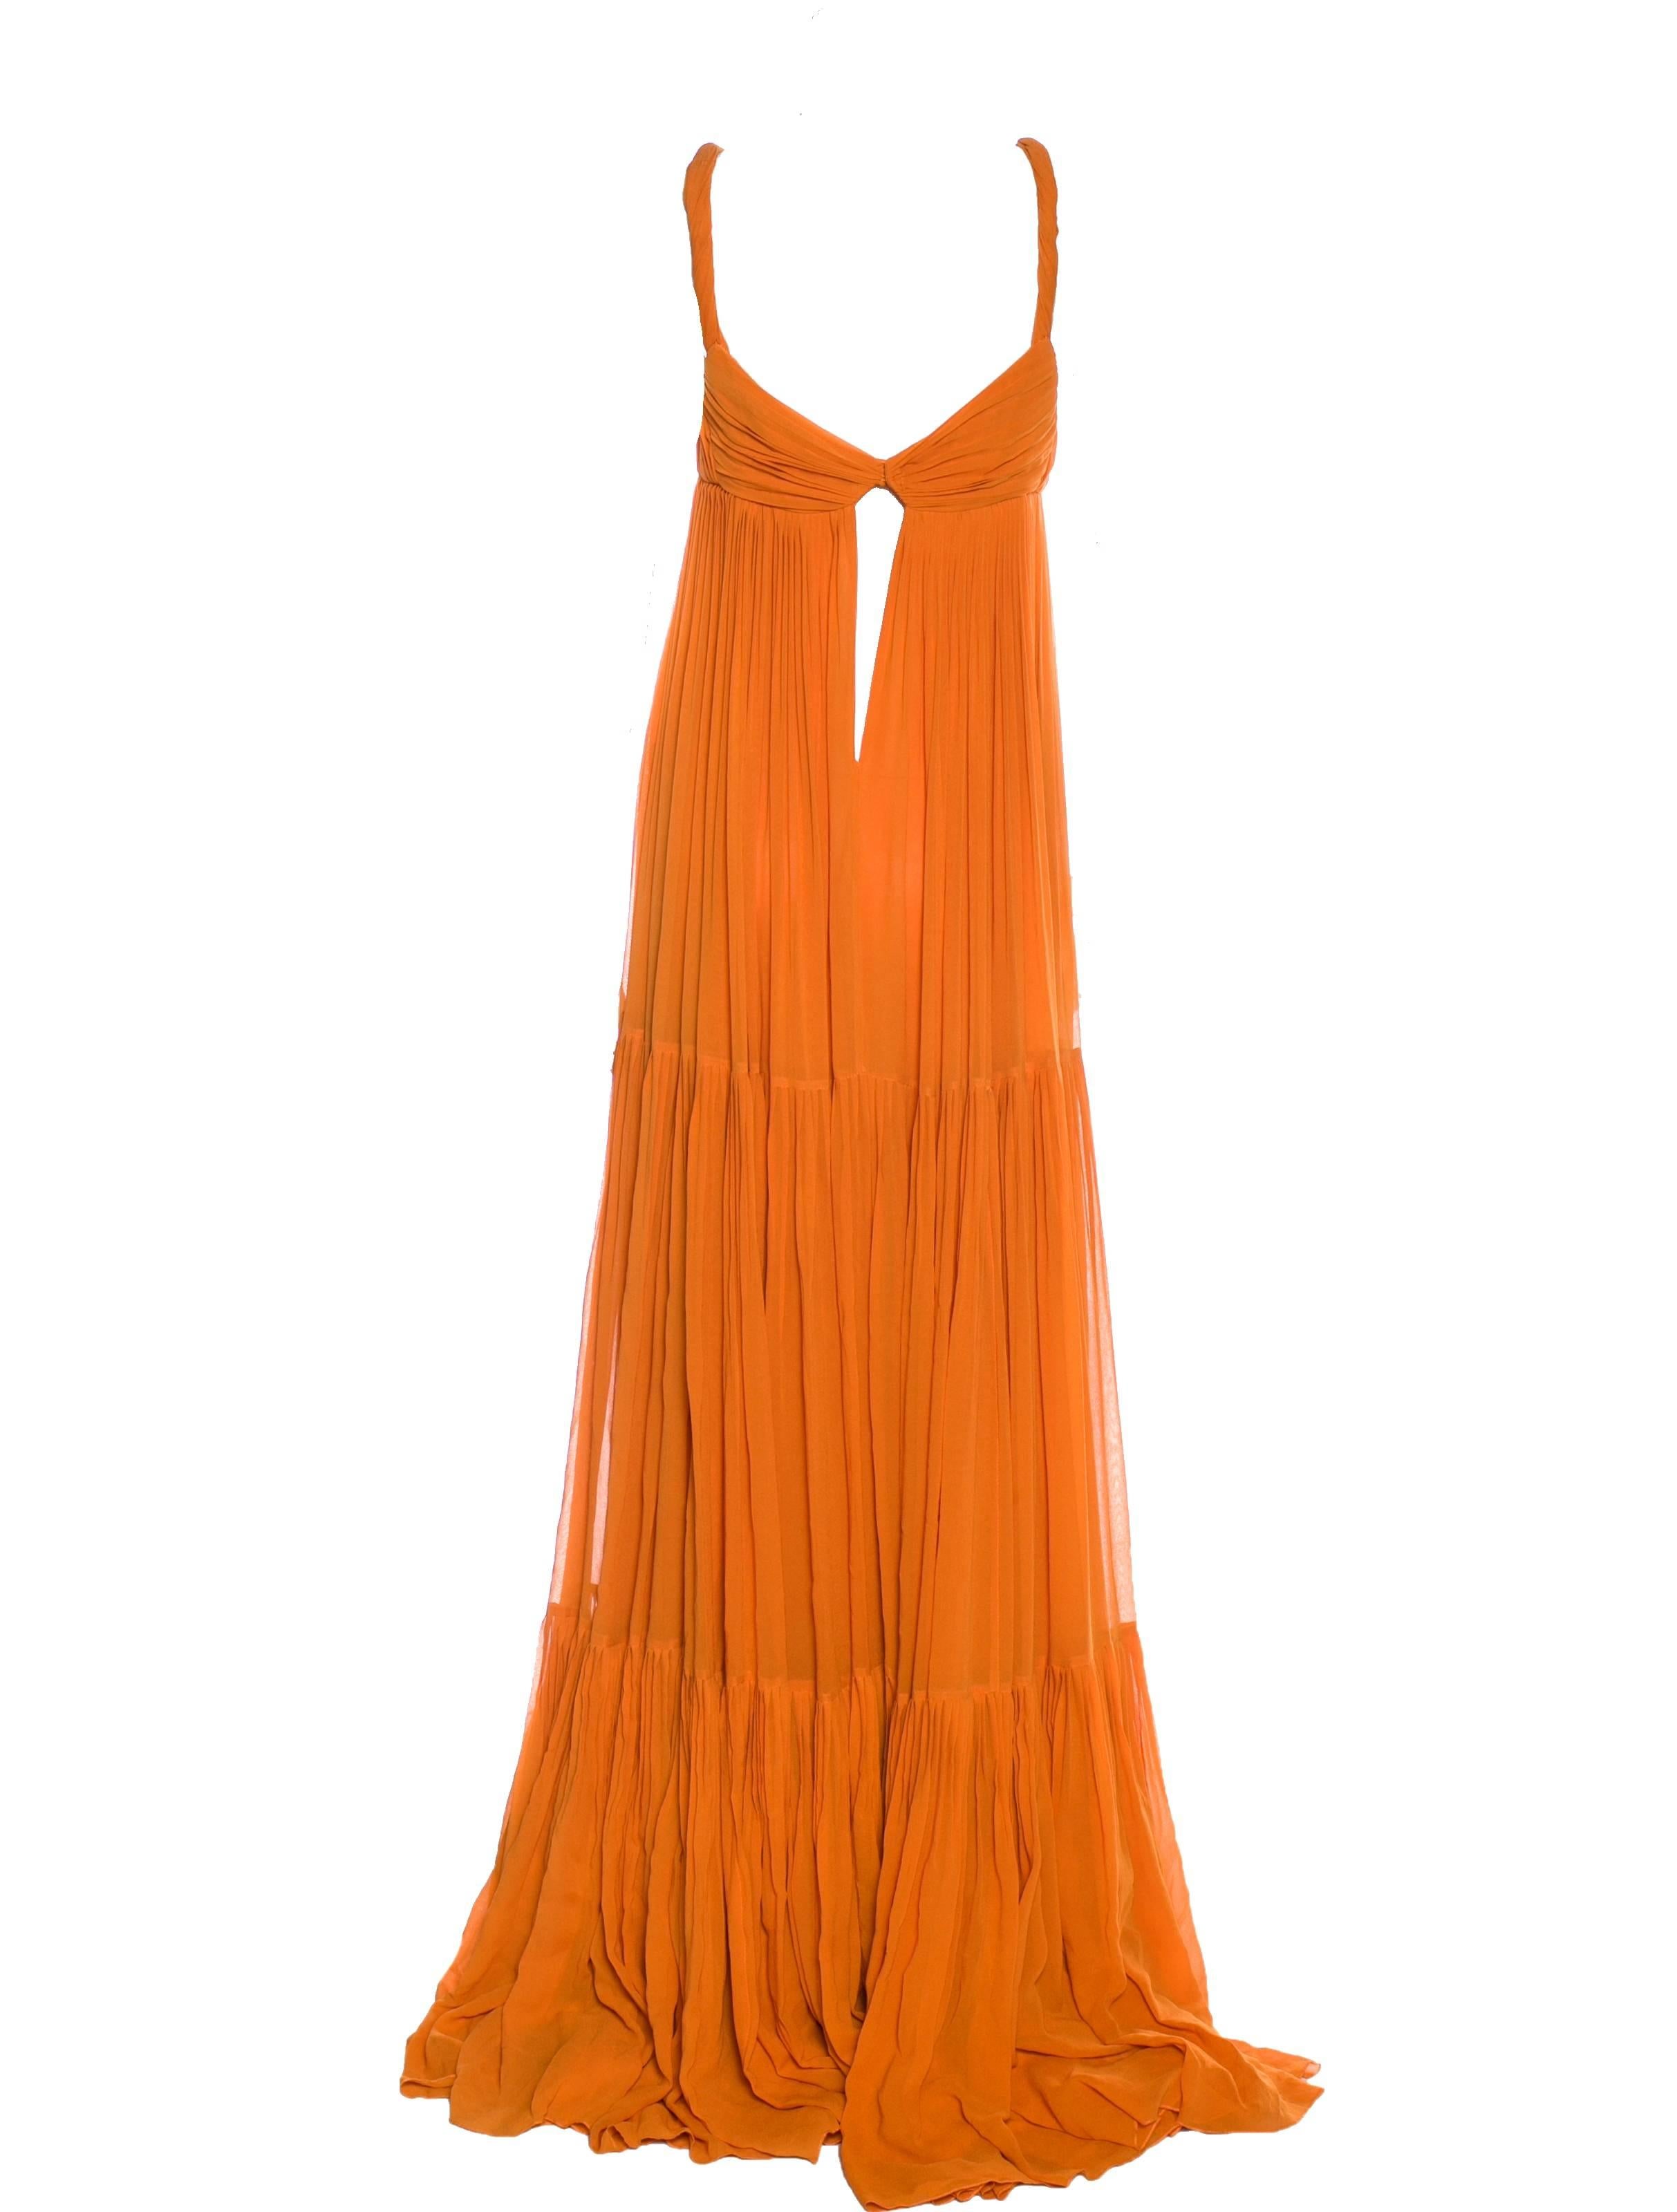 Stunning orange Gucci evening gown
Seen on Blake Lively
A truly gorgeous piece
Layered finest silk
Plisee details
Full length
Gold hardware details on straps
100% Silk
Special Dry Clean only
This gown retailed at Gucci for 7499$